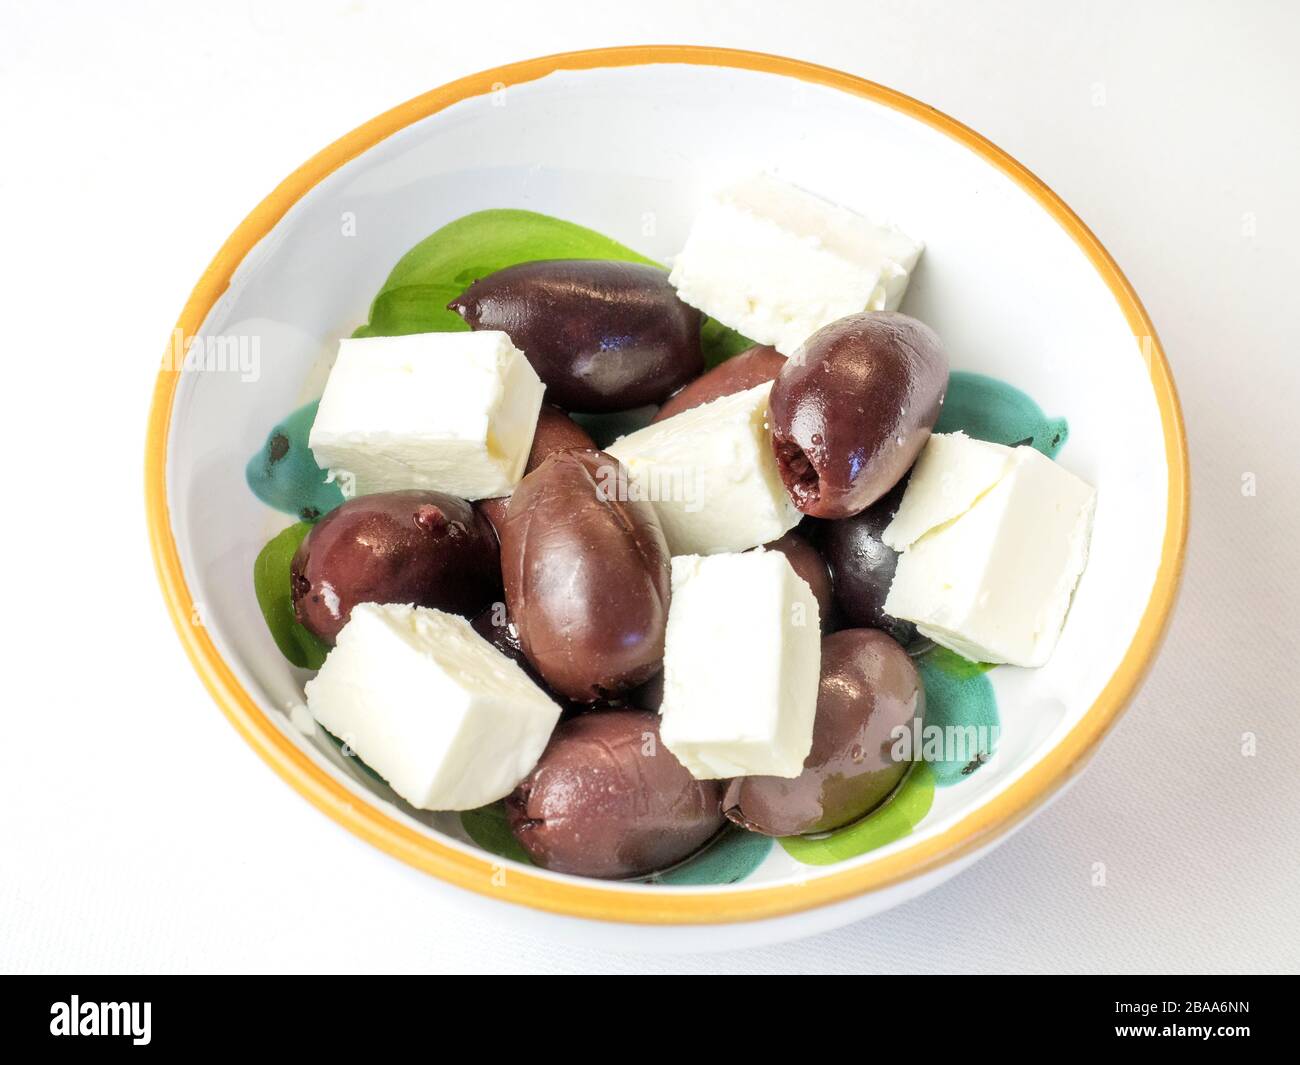 Kalamata olives and feta cheese in a bowl on a white tablecloth Stock Photo